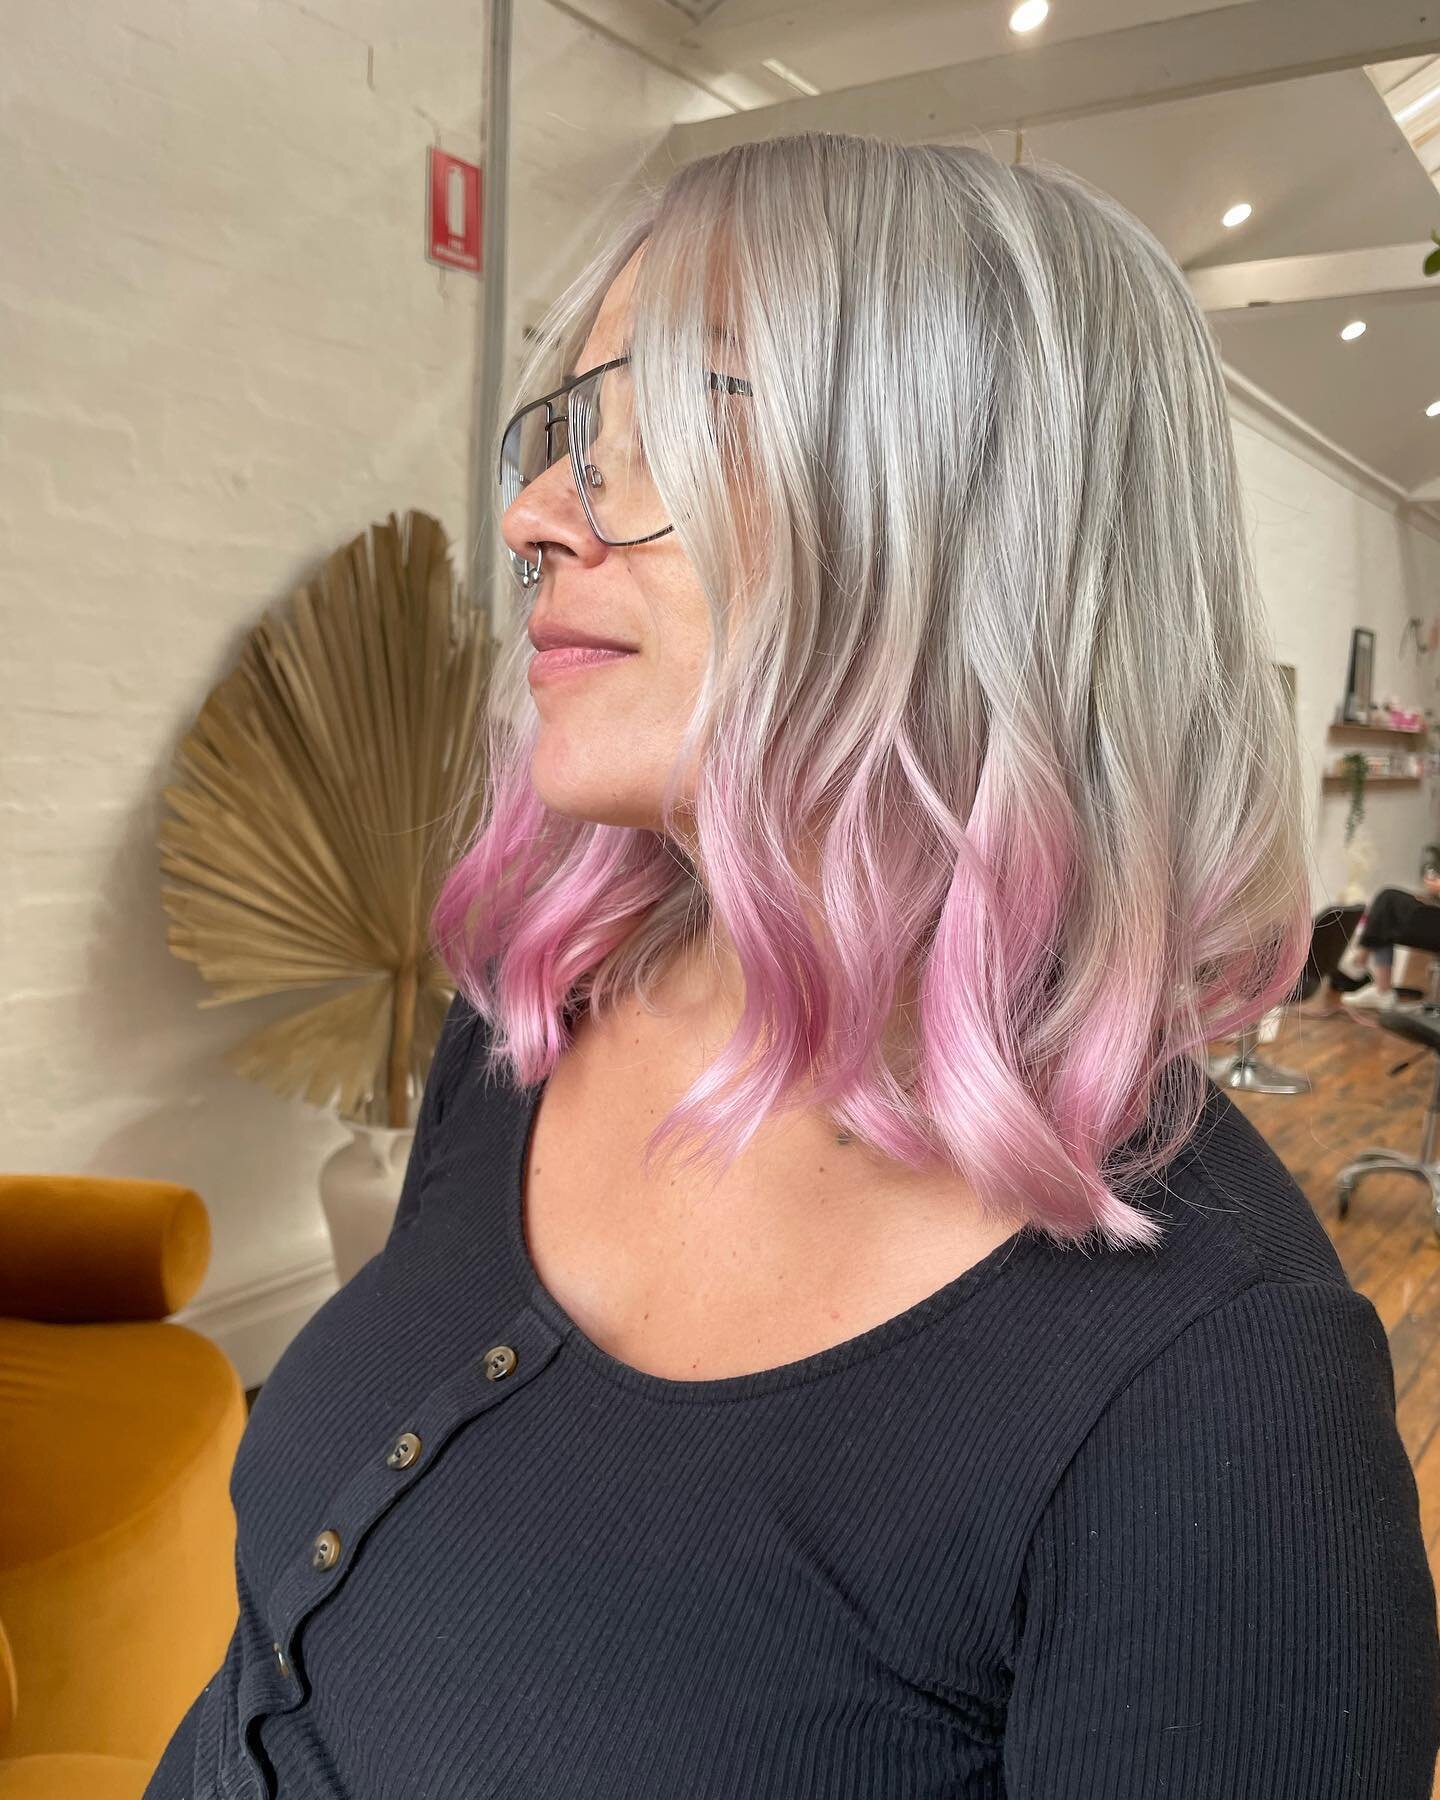 Brings light to my face 😍😍😂 @eightyandtwo love you !!! Can&rsquo;t wait to meet your miracle baby gal 💖💖💝💝

#ddcohair #pinkhair #kemoncolor #arcticfoxhaircolor #annadalehairdresser #annadalesalon #warehousesalon #maneaddicts